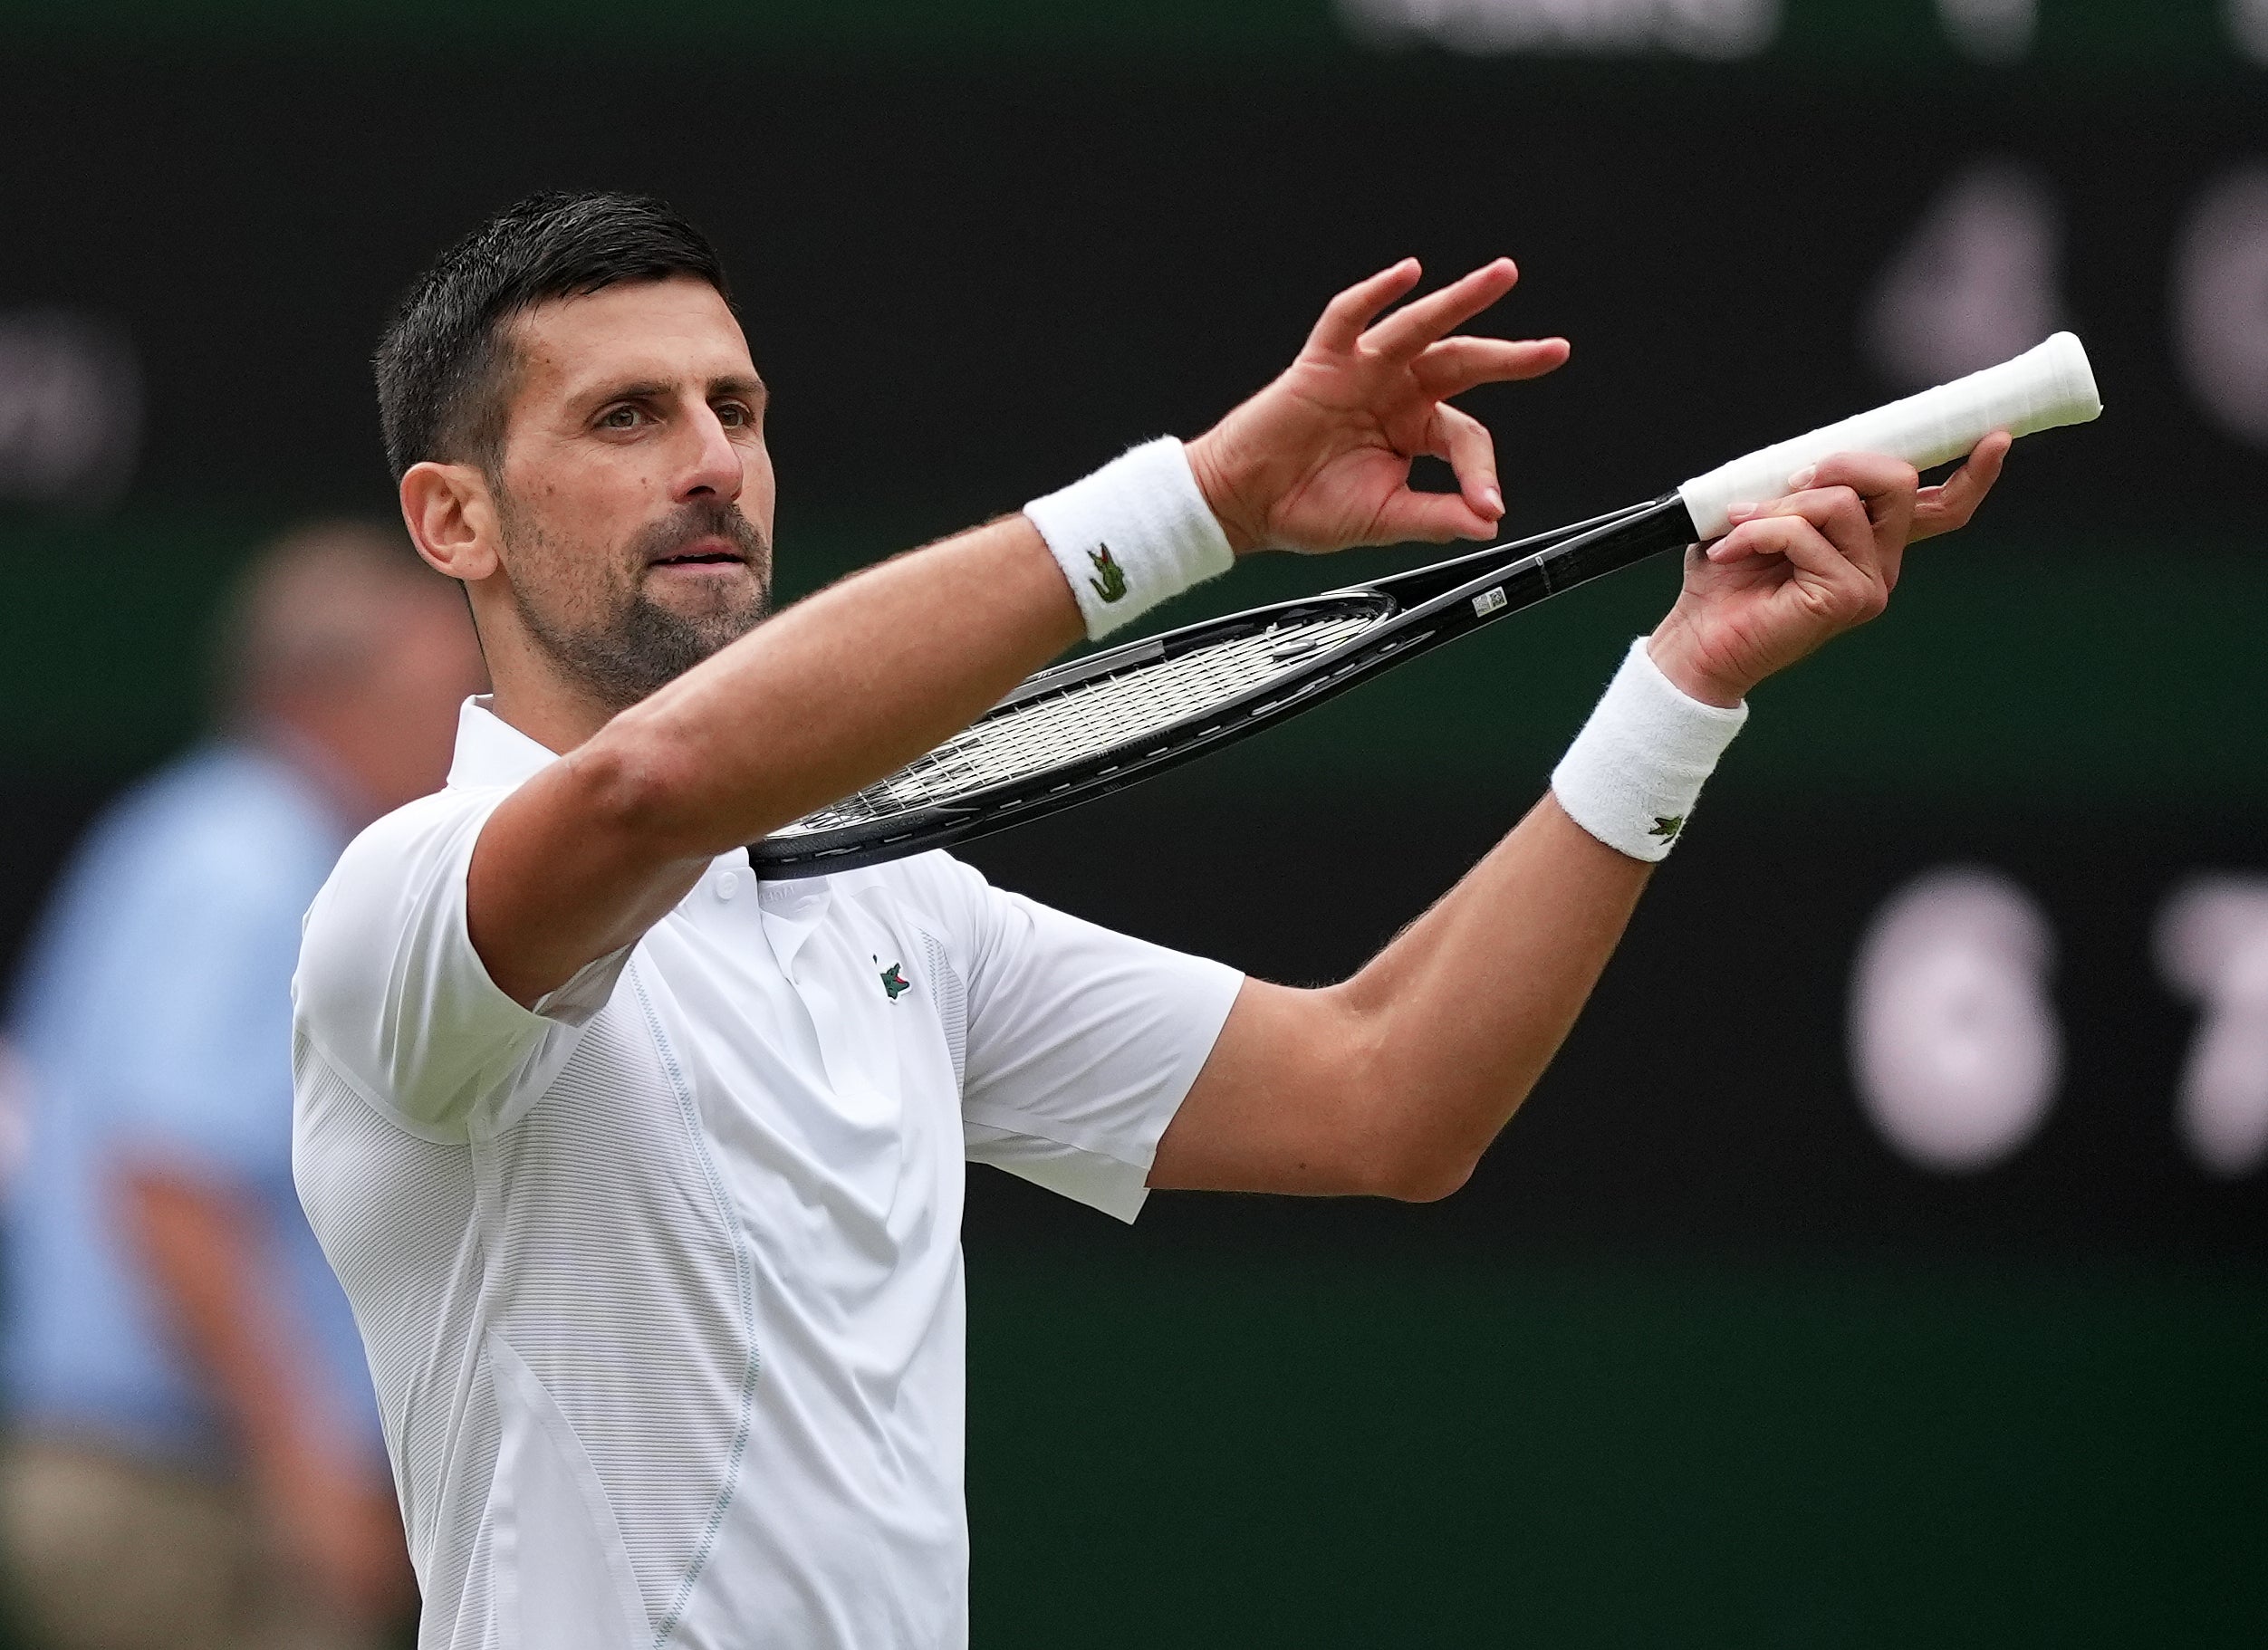 Novak Djokovic once again pretended to play the violin in a celebration for his daughter Tara after a straight-sets win over Lorenzo Musetti on Friday